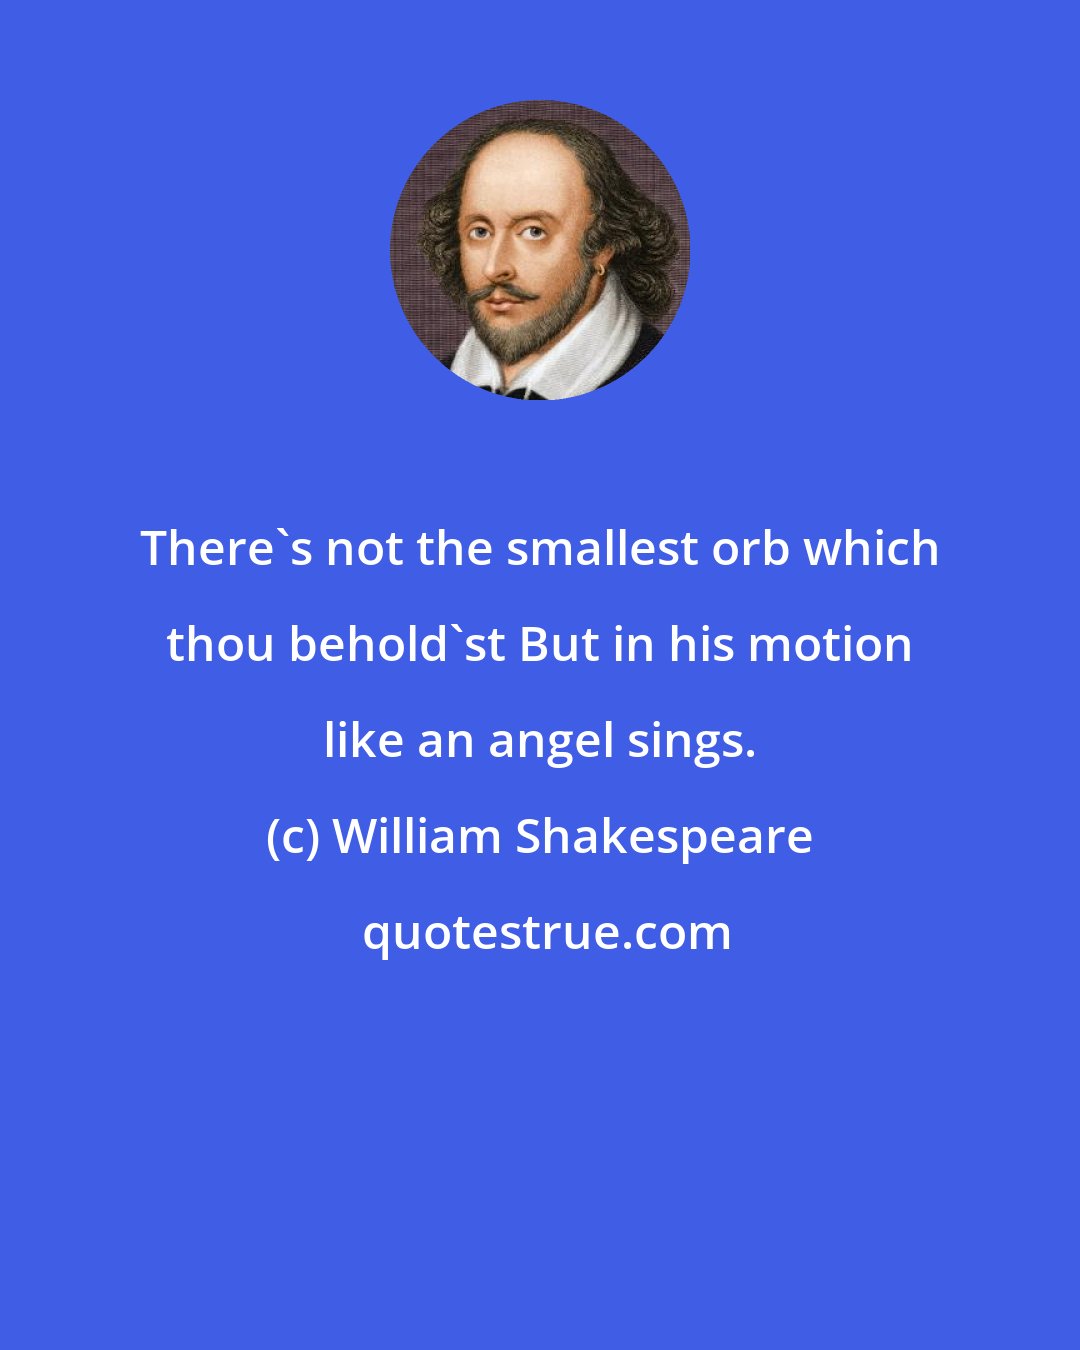 William Shakespeare: There's not the smallest orb which thou behold'st But in his motion like an angel sings.